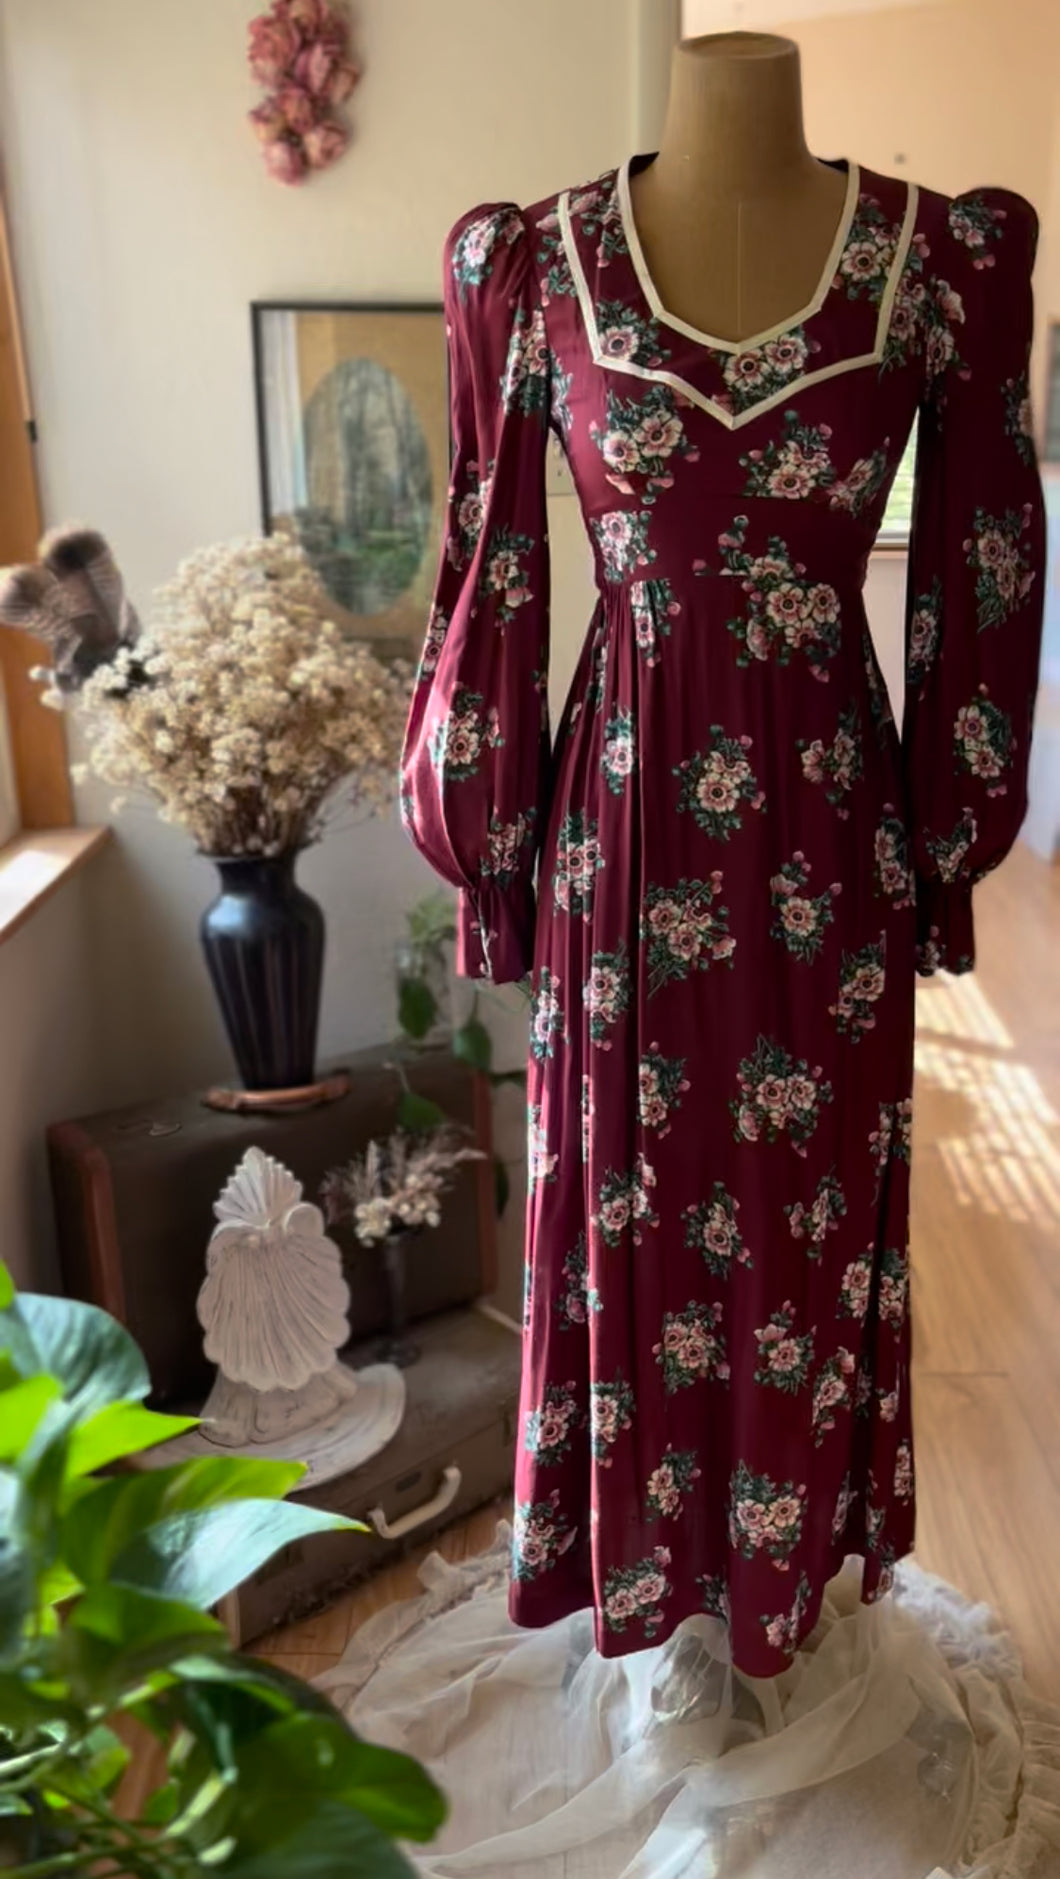 Authentic 1970's vintage burgundy rayon dress by Jody of California